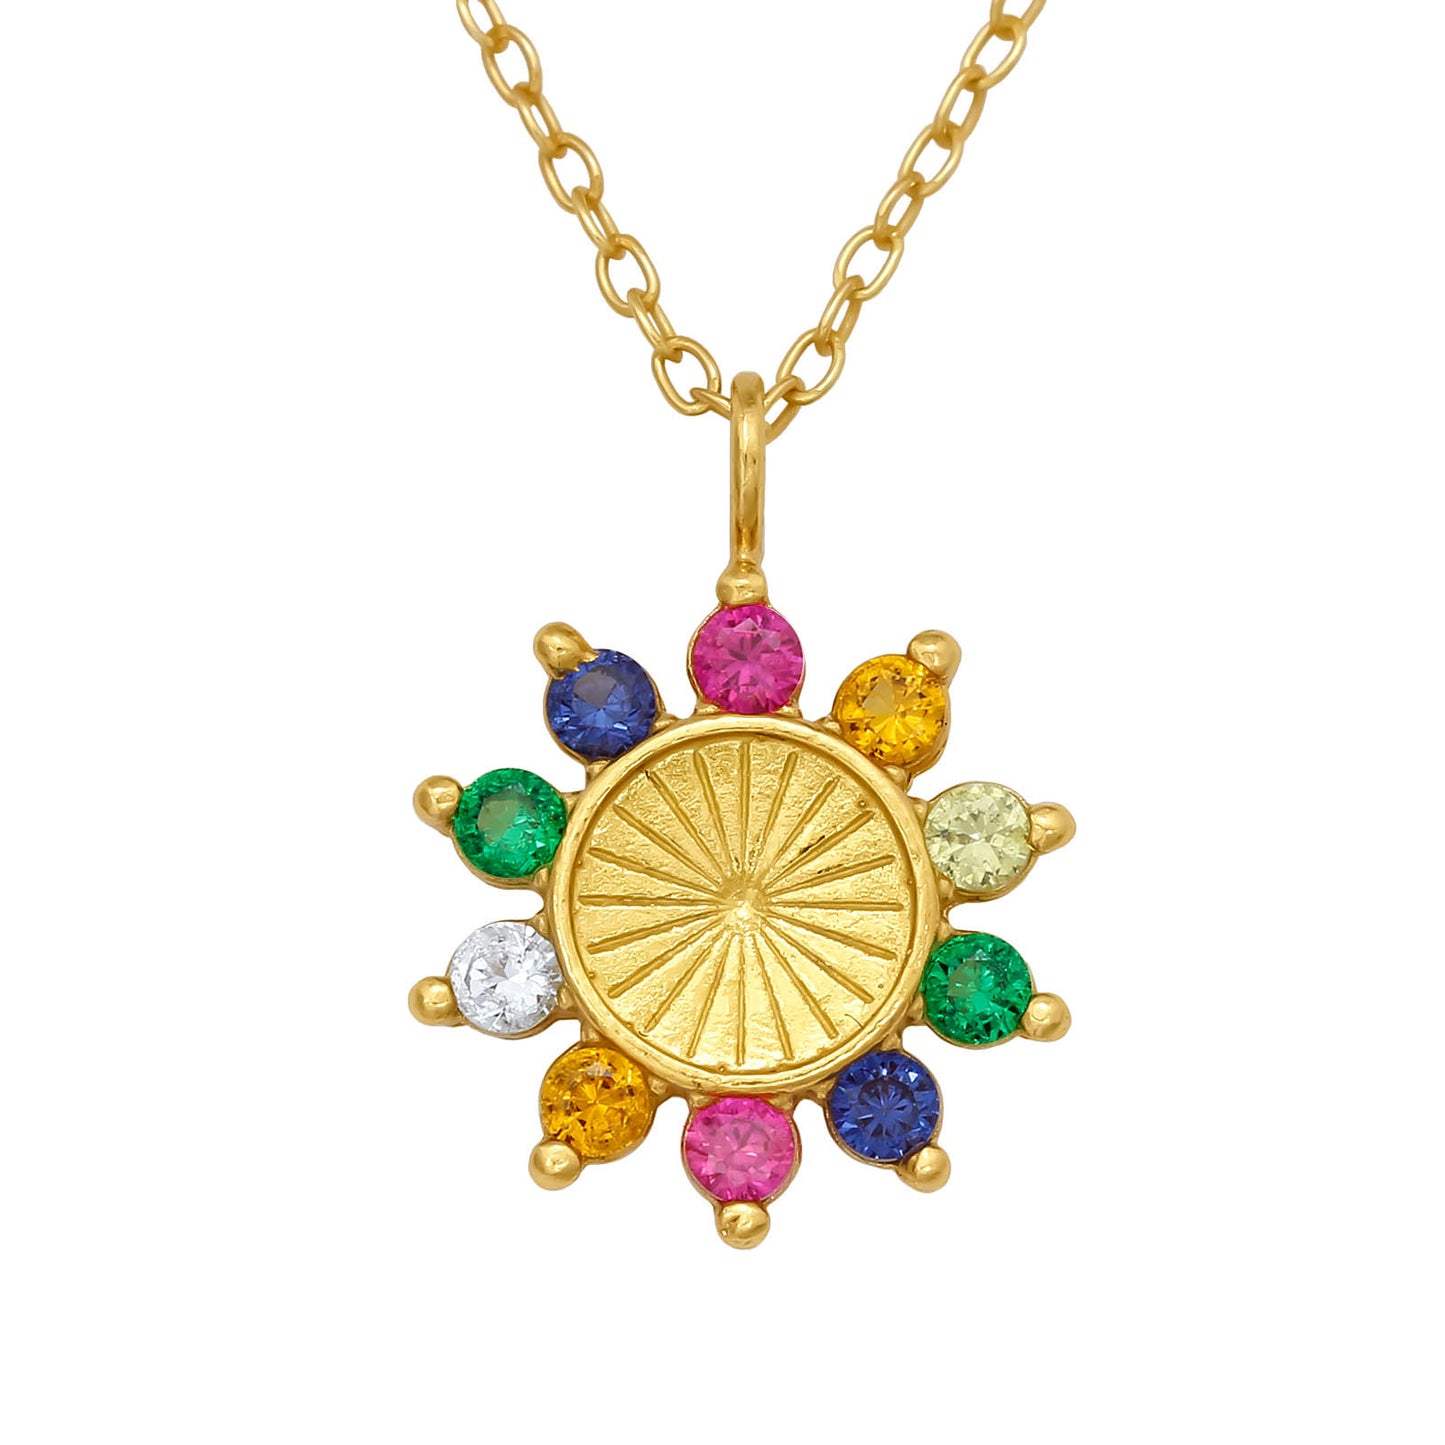 GOLD PLATED SUN FLOWER NECKLACE - Gold Sterling Silver Pendant with Gold Chain